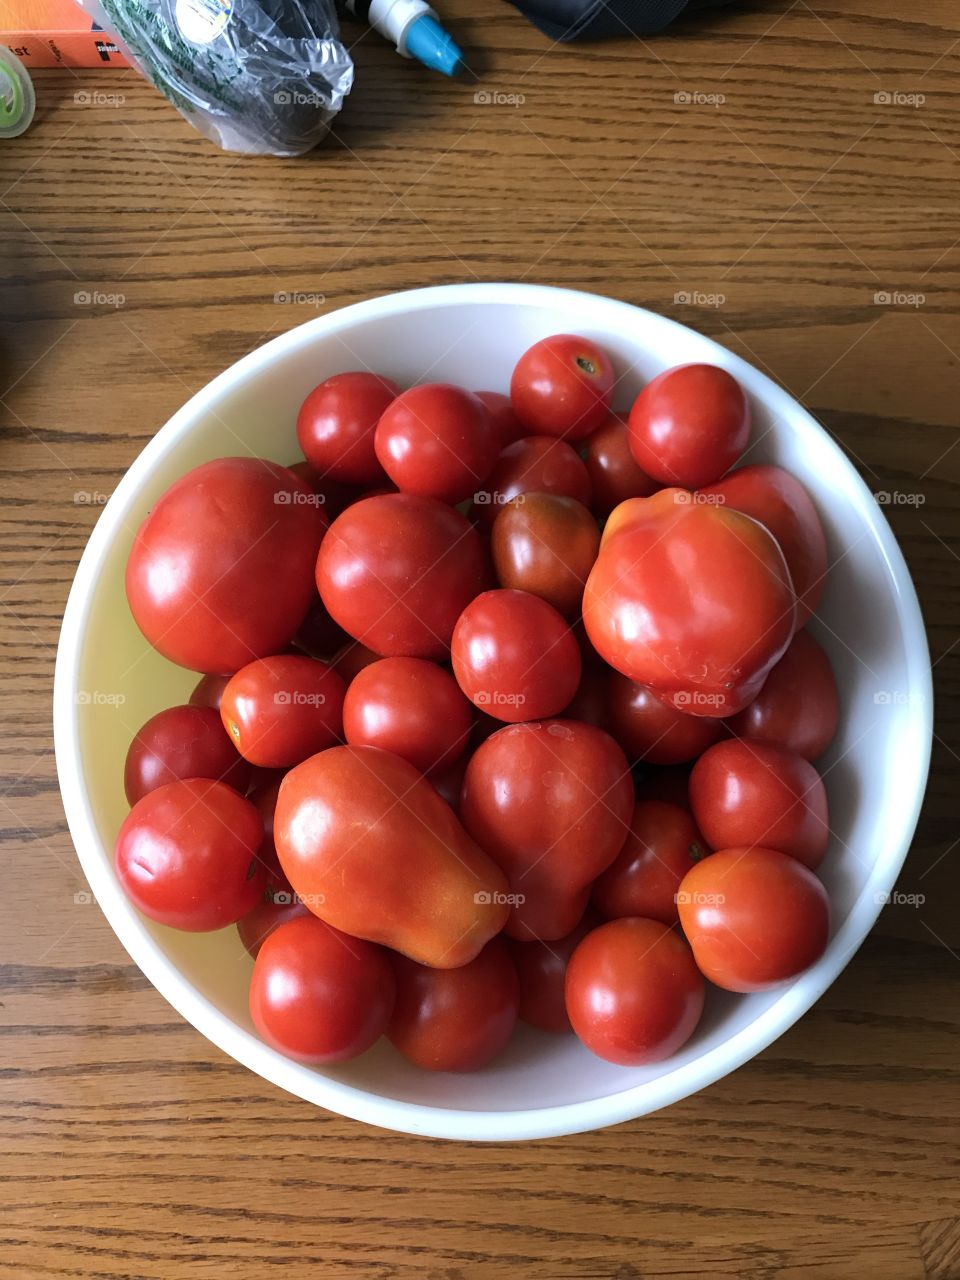 Fresh picked tomatoes from our garden